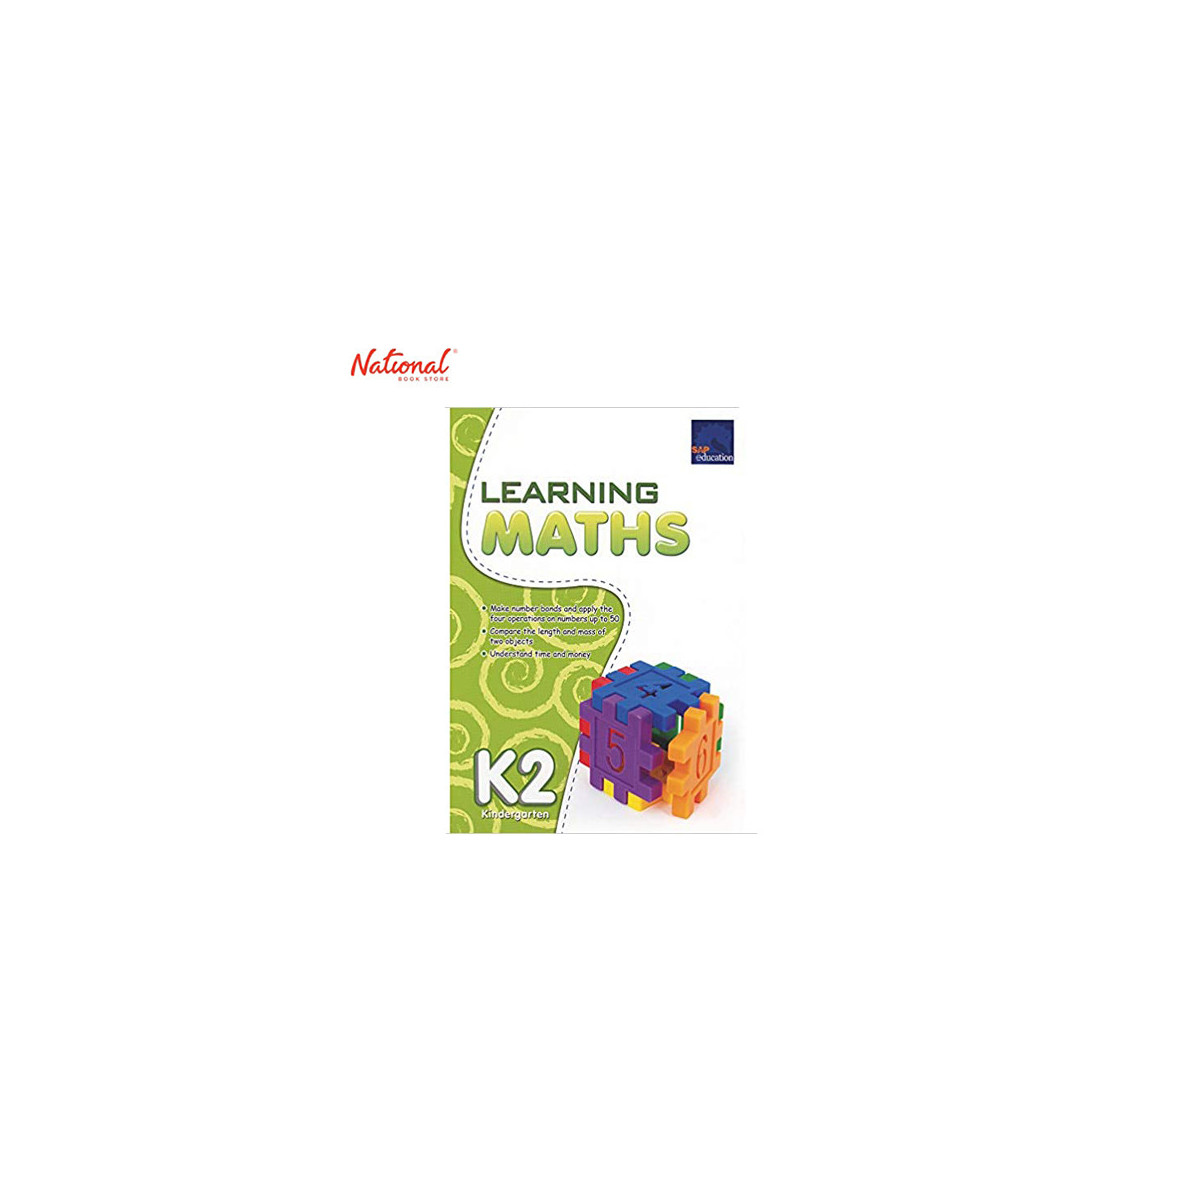 Learning Maths Kindergarten 2 Trade Paperback by S. James